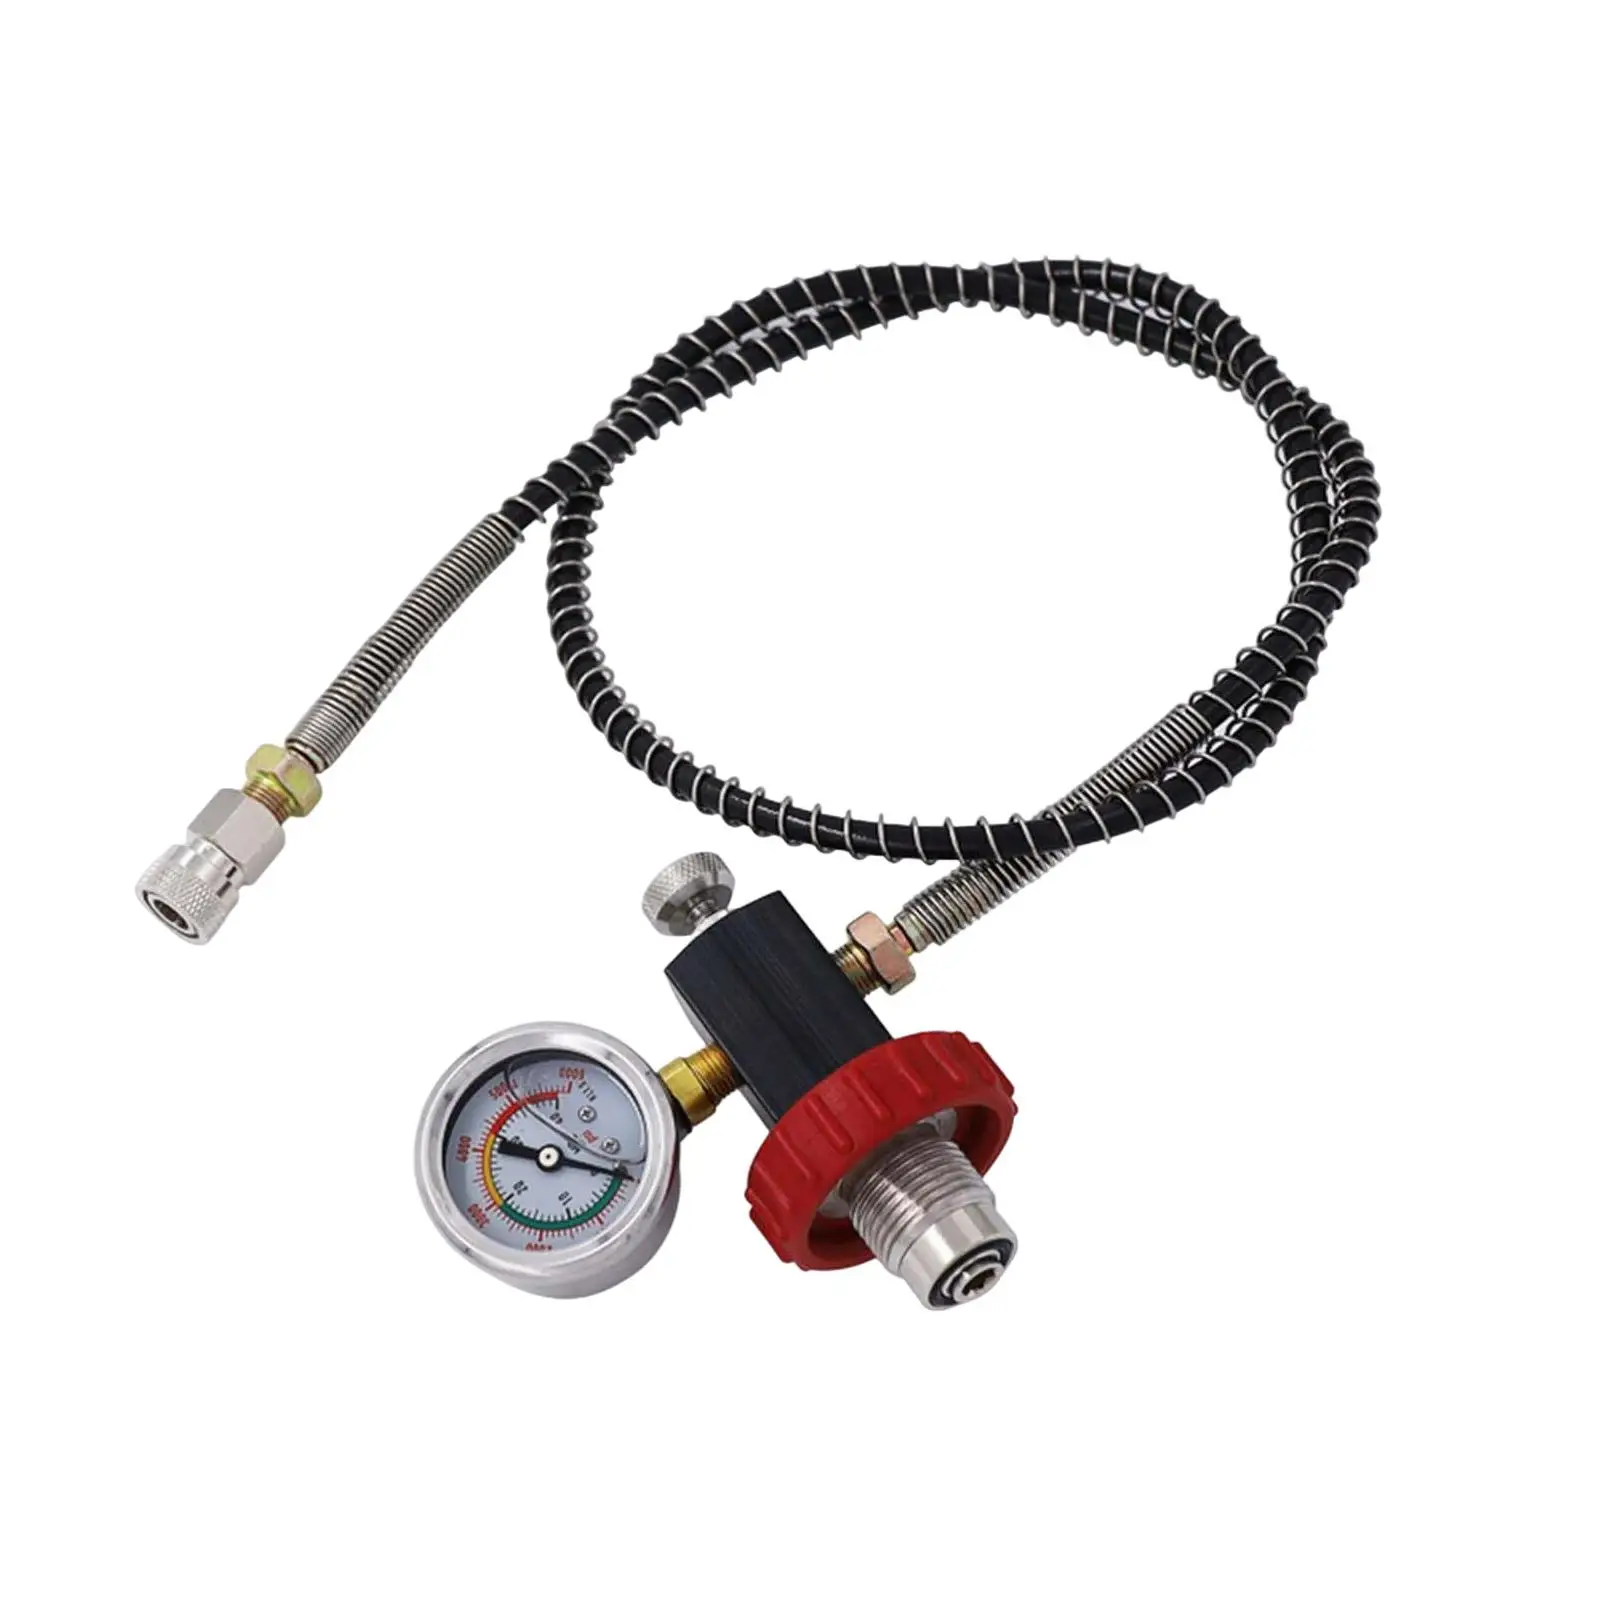 Scuba Tank Refill Adapter with 32inch Hose with Gauge Portable 6000PSI